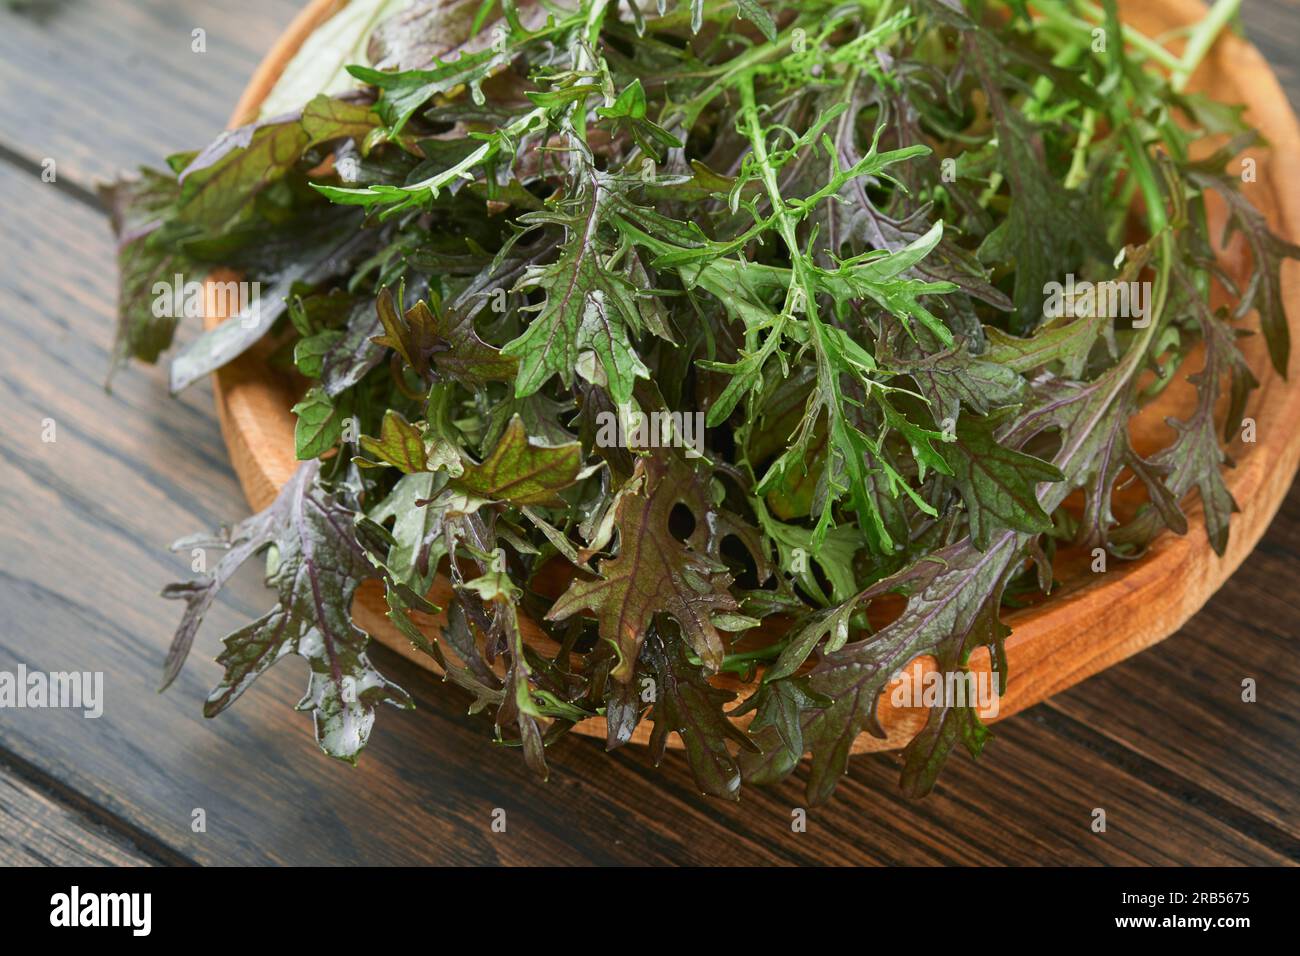 Arugula. Fresh leaves arugula salad on wooden bowl on old wooden table background. Arugula is source of vitamins and trace elements necessary for heal Stock Photo